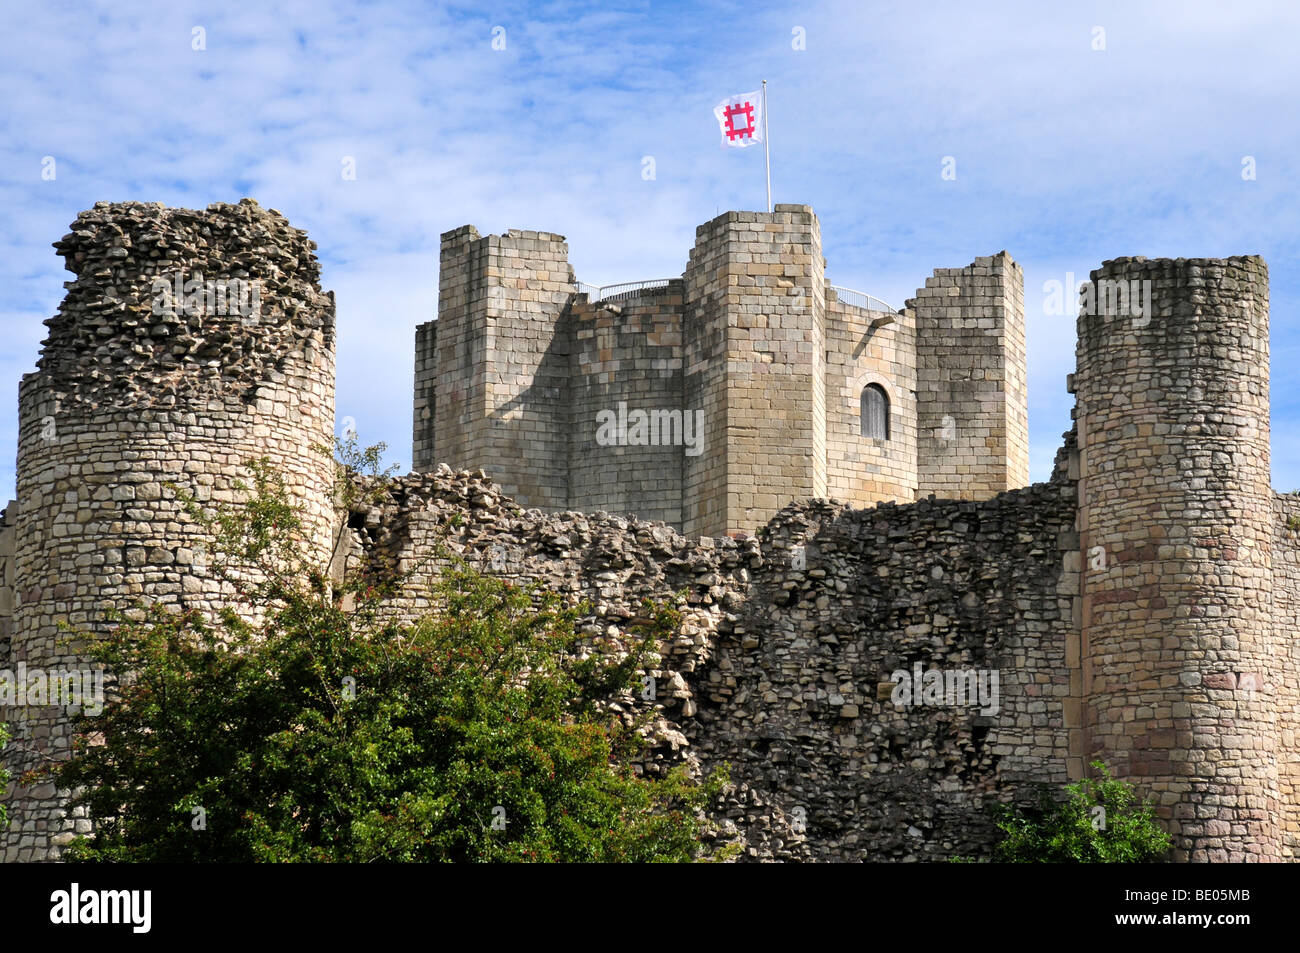 Conisbrough Castle Doncaster South Yorkshire with English Heritage flag flying Stock Photo